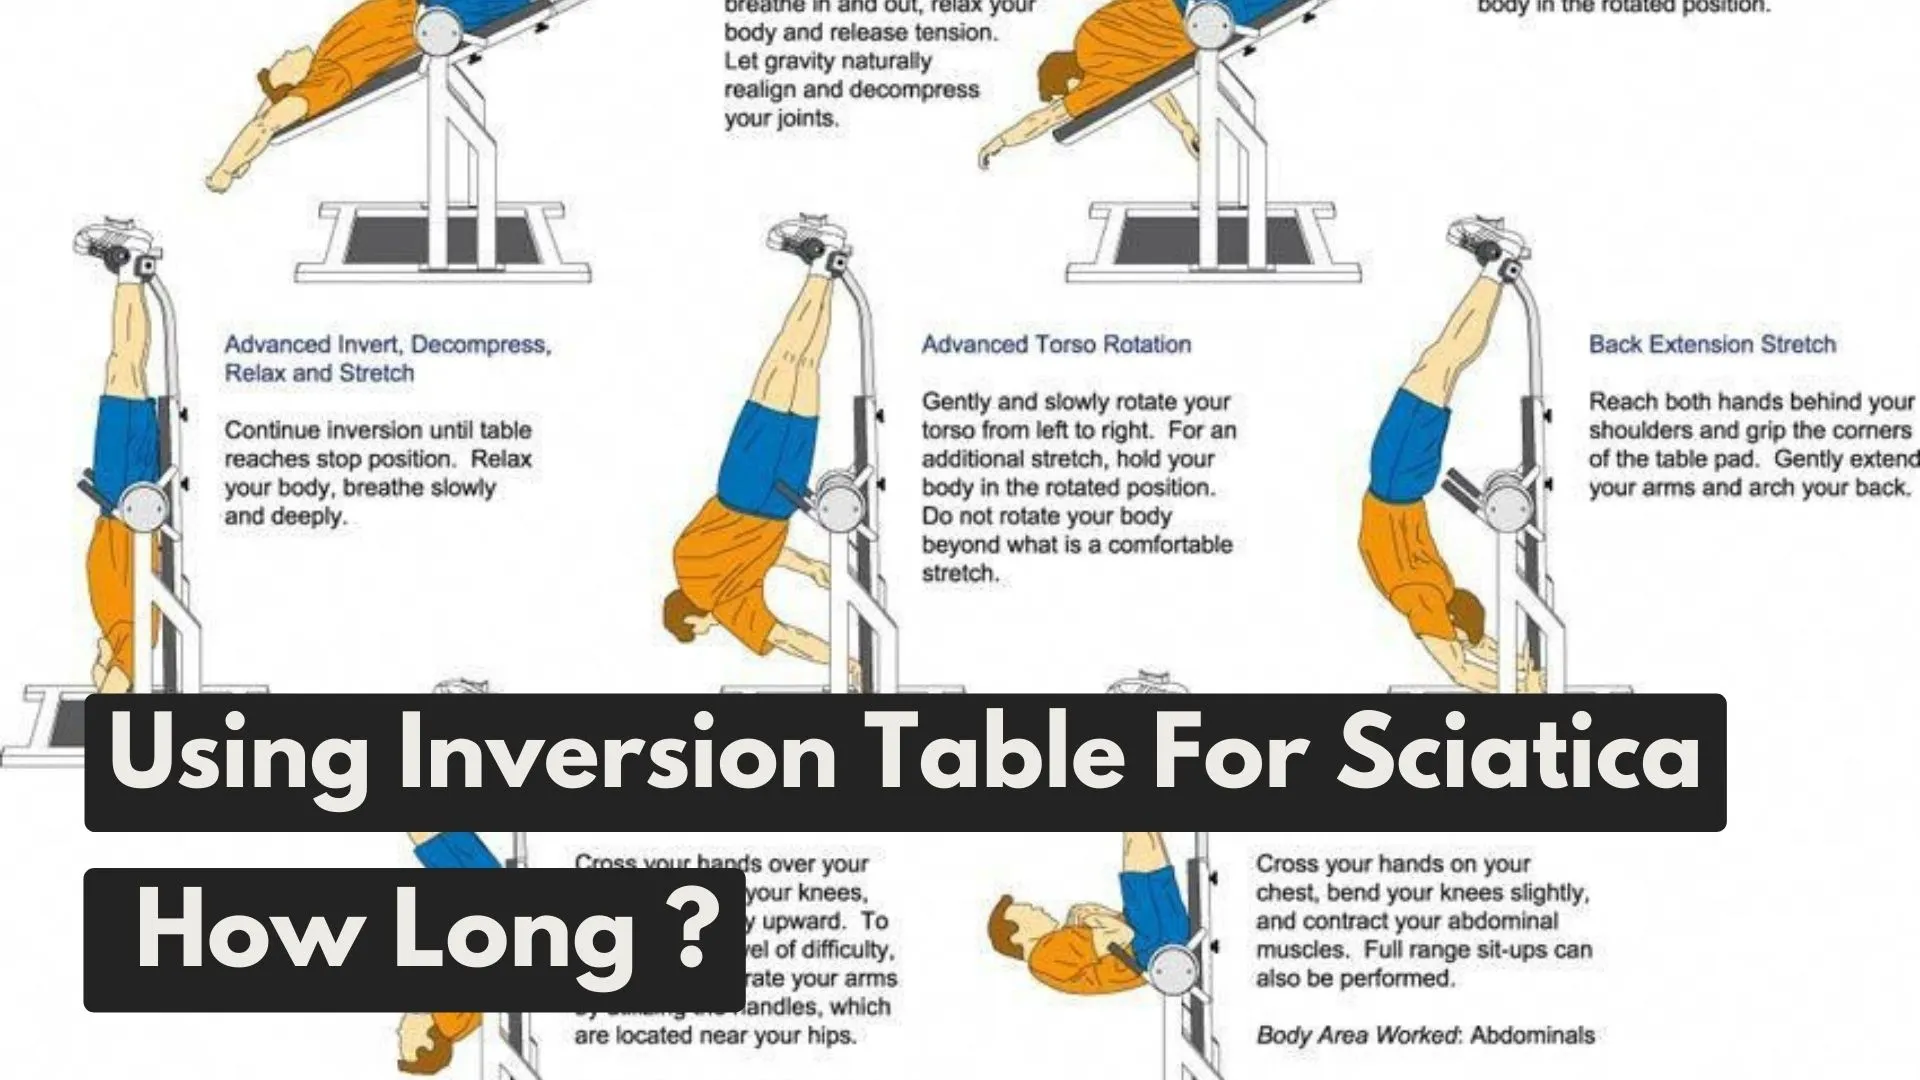 How Long Should I Use An Inversion Table For Sciatica by Inversion Table Hub InversionTablehub.com